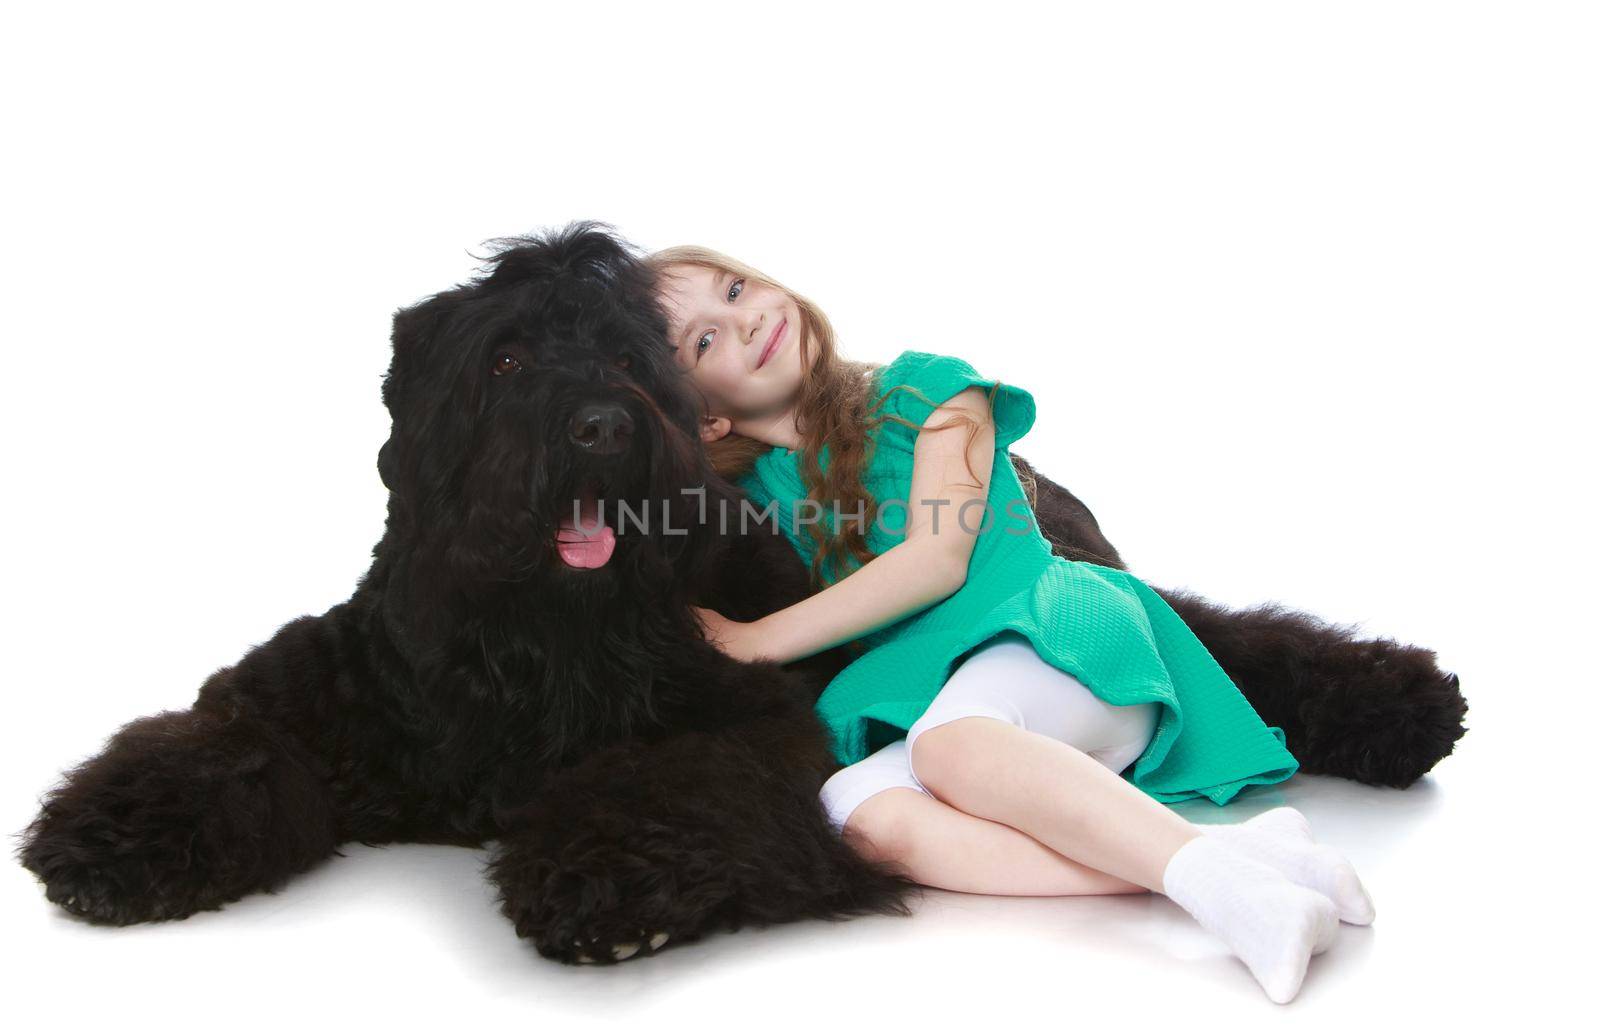 Cute little girl with long brown hair to her waist . Girl lying on the floor curled up with a big, black, shaggy dog - Isolated on white background